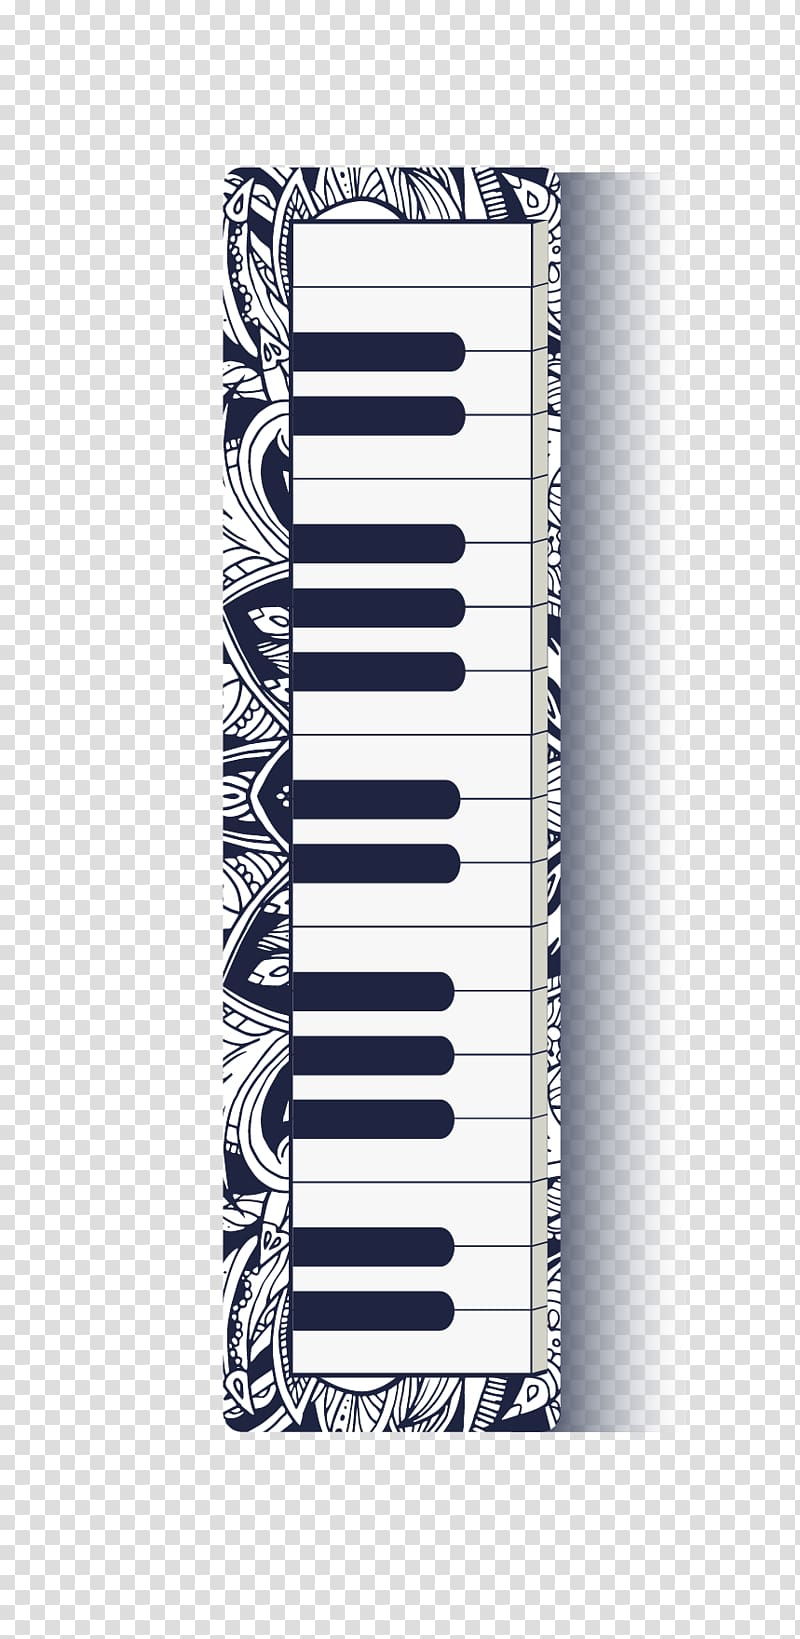 Piano Musical keyboard, Creative piano keys material transparent background PNG clipart